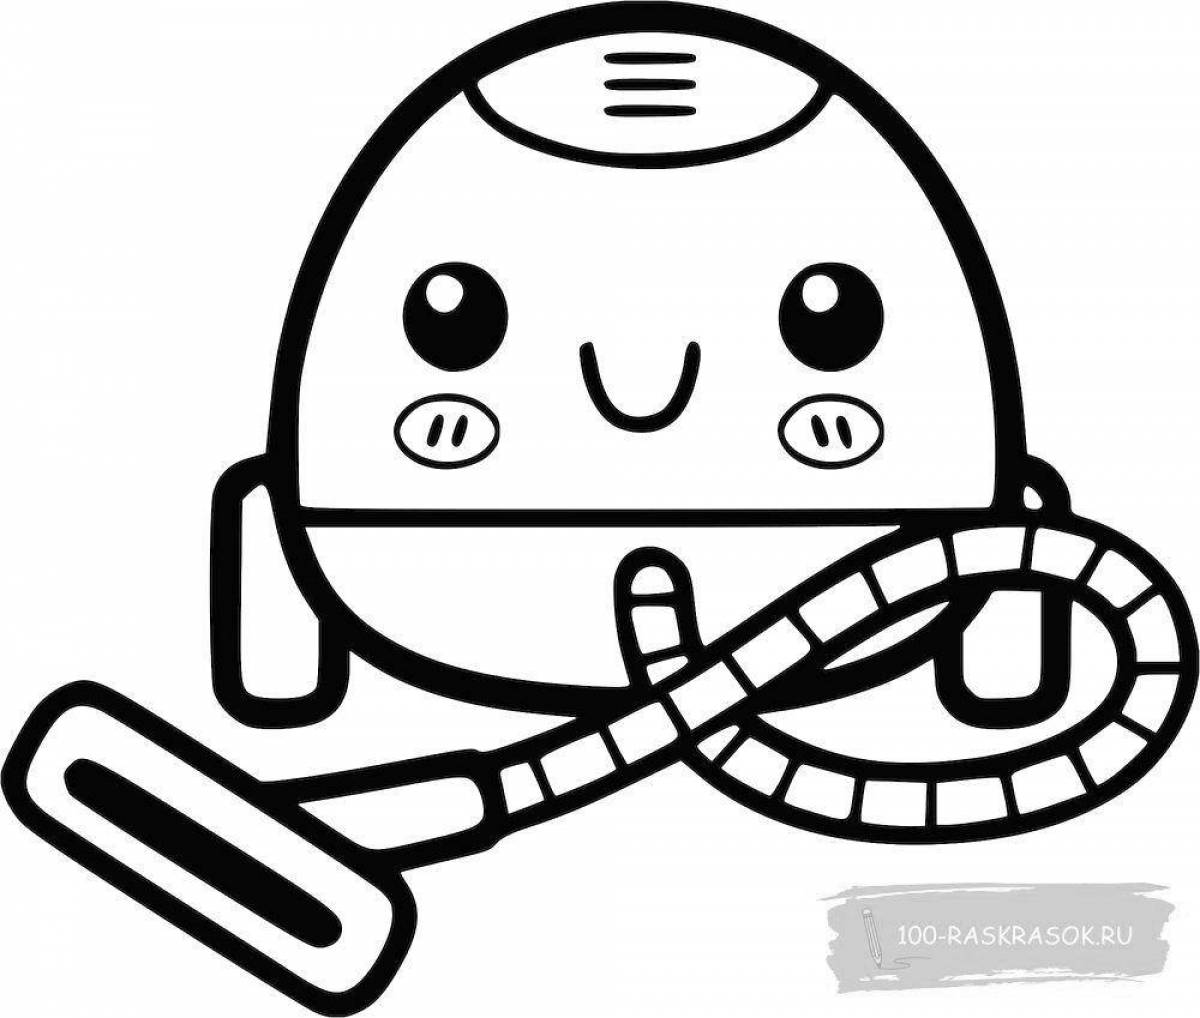 Cute robot vacuum cleaner coloring pages for boys